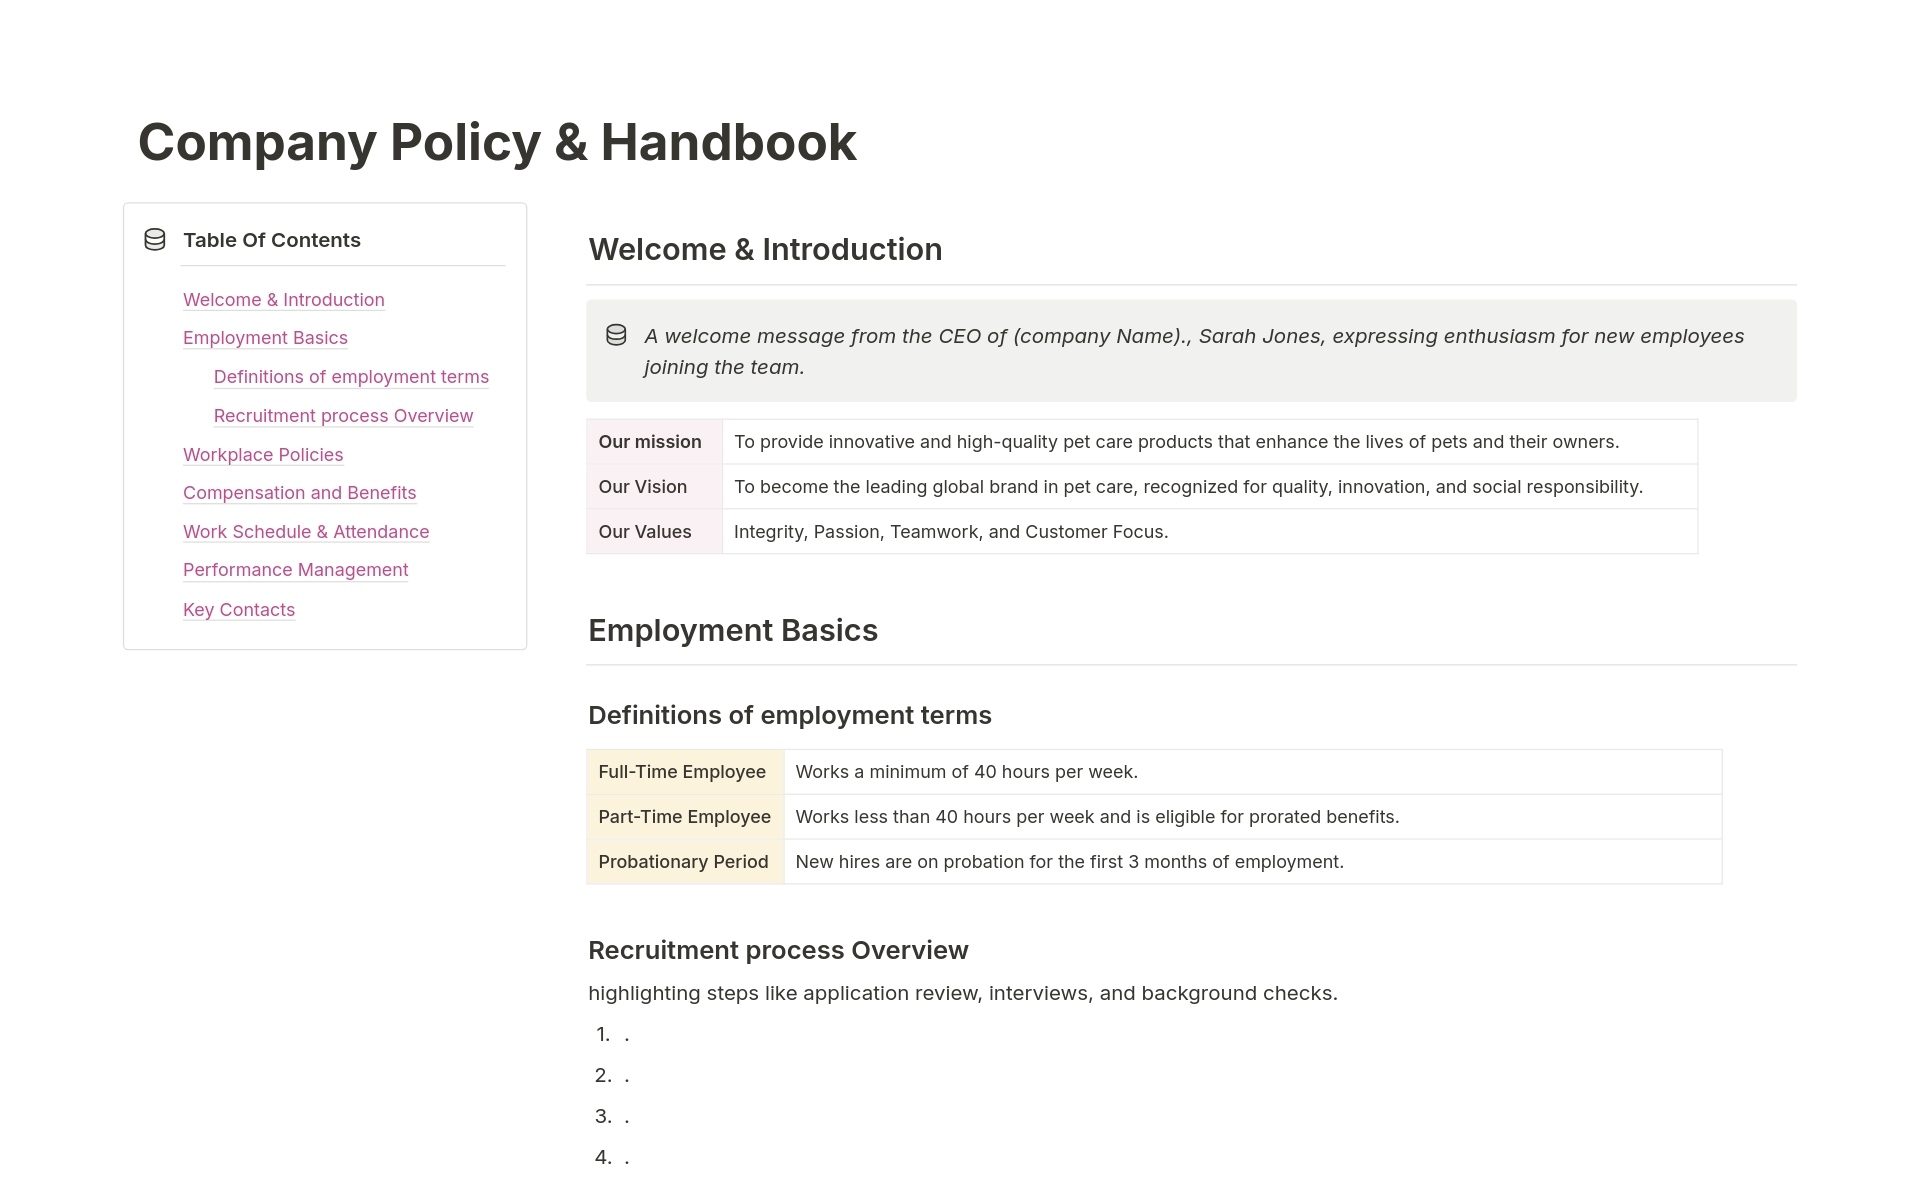 This product offers a modern solution for creating a customizable company policy & handbook that streamlines onboarding, boosts employee engagement, and ensures compliance.